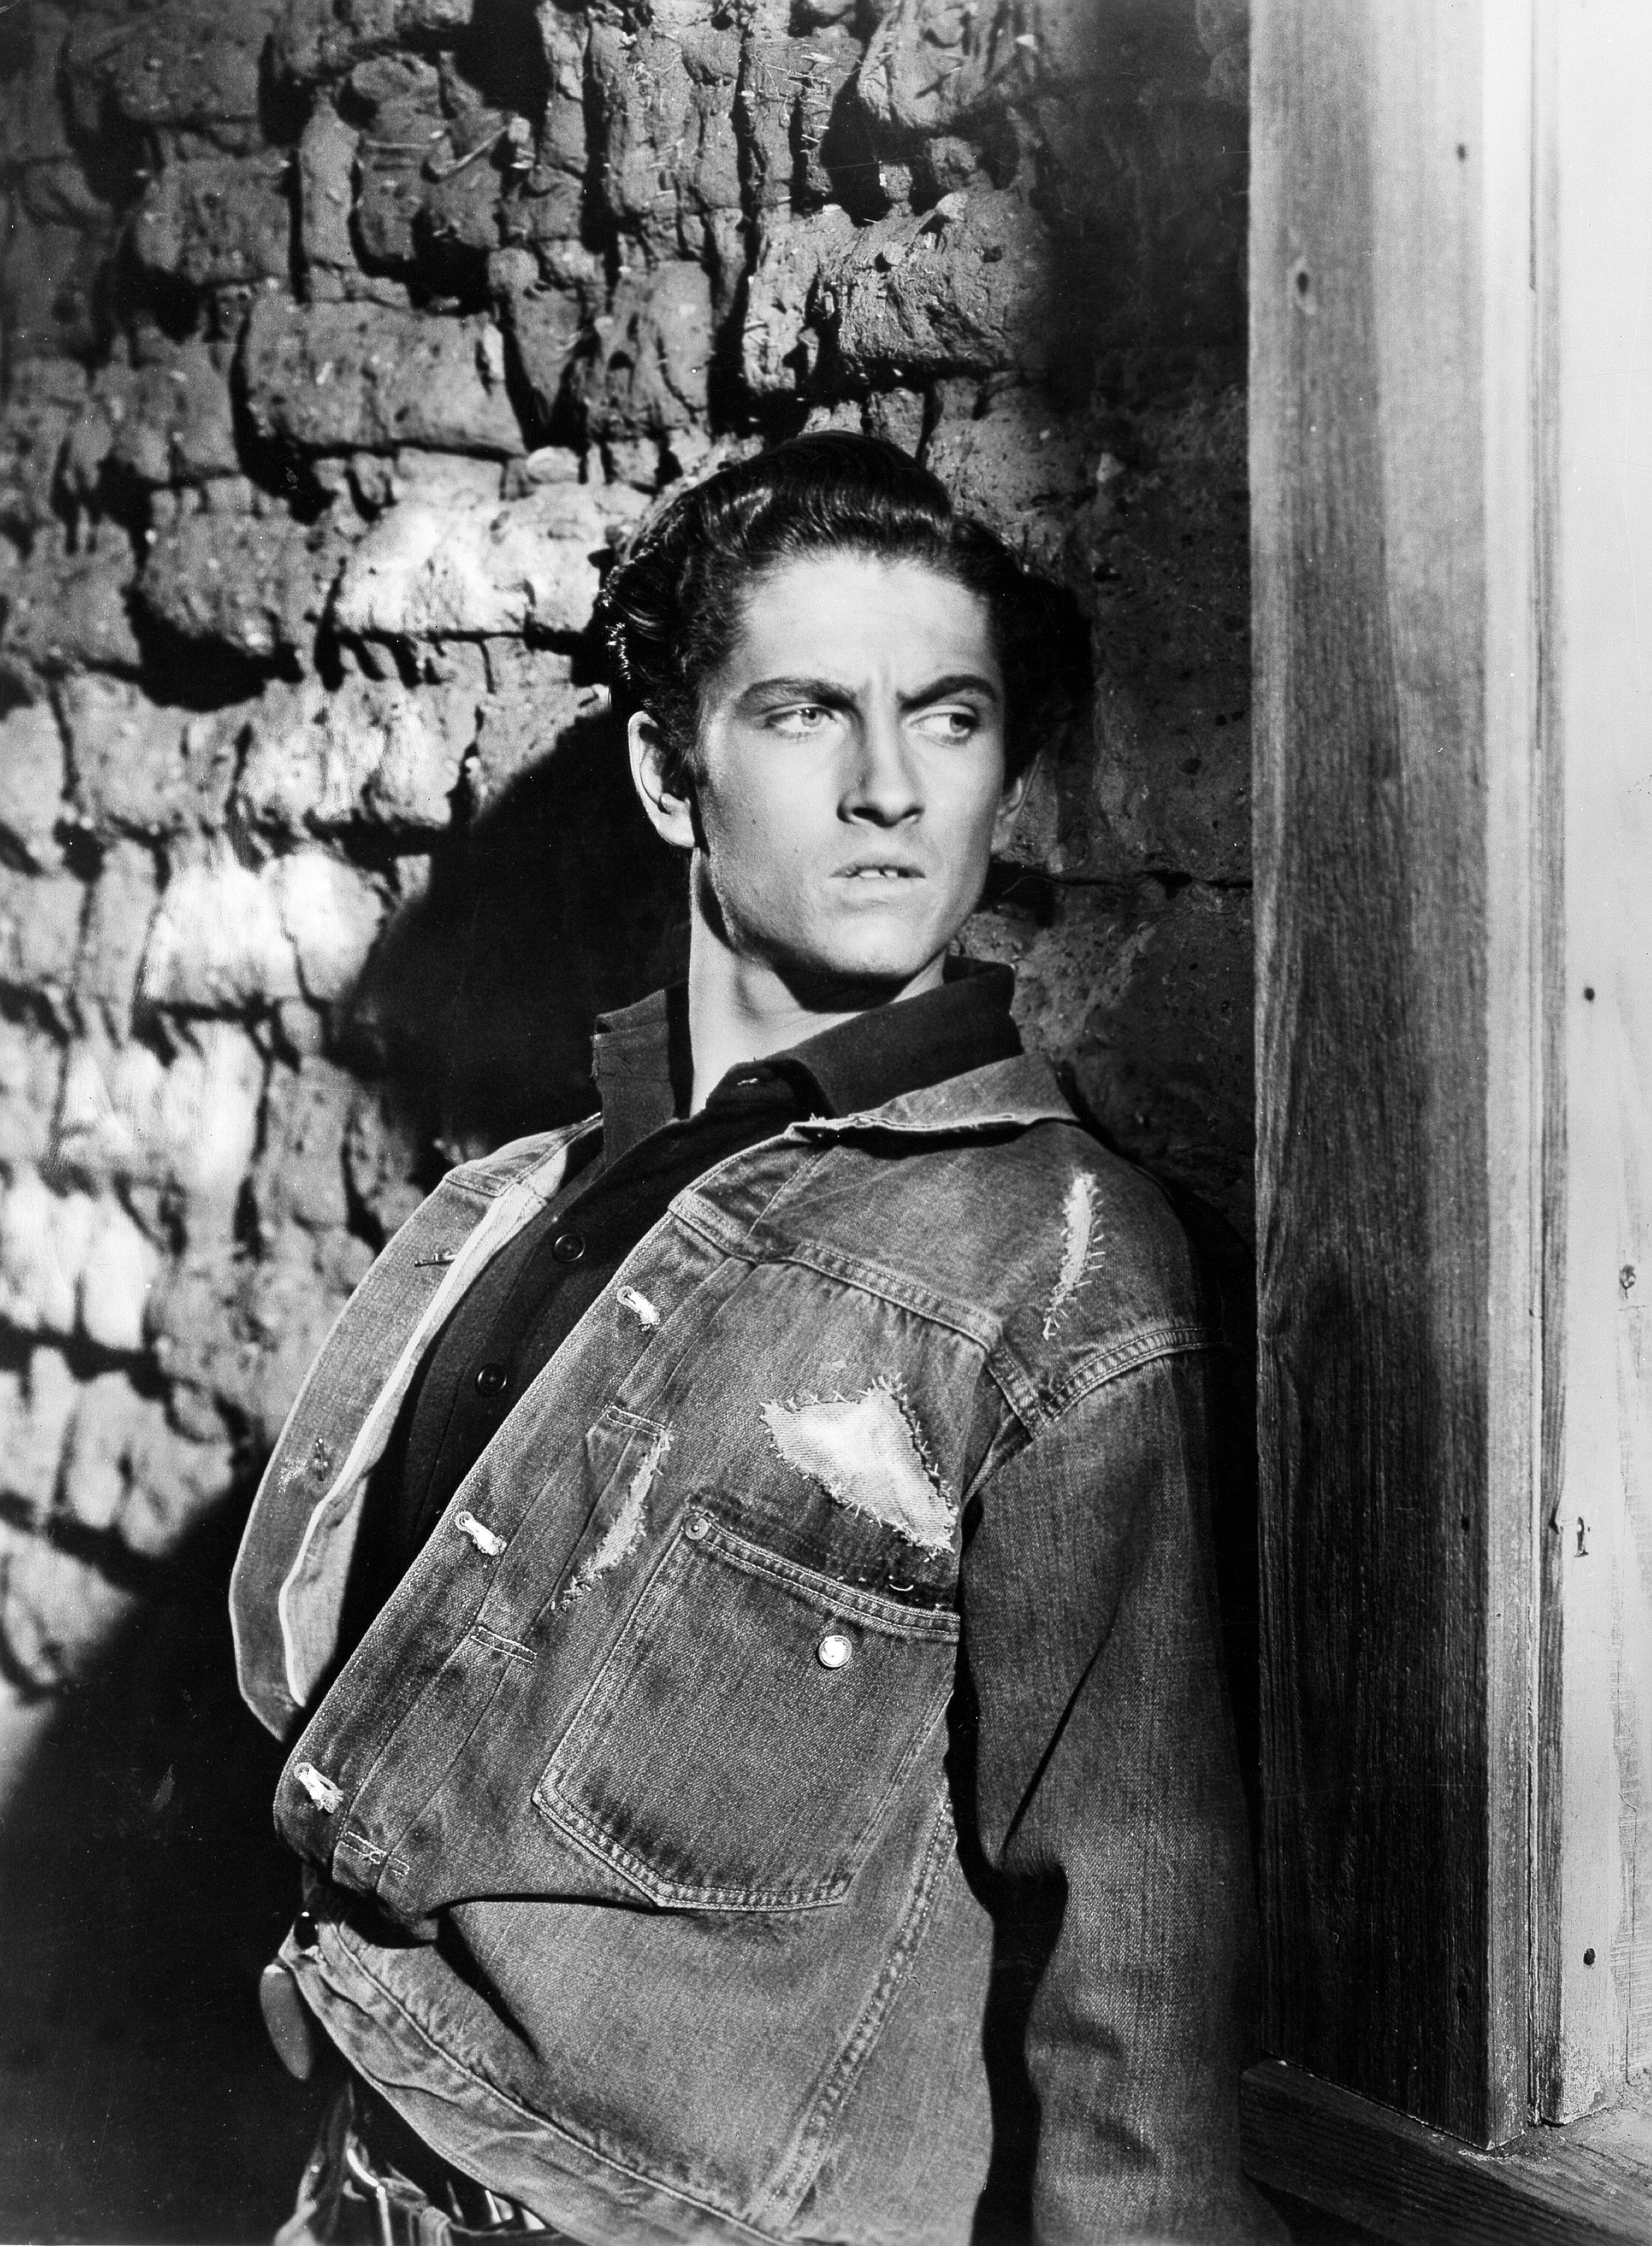 John Drew Barrymore on the set of "High Lonesome" circa 1950 | Source: Getty Images